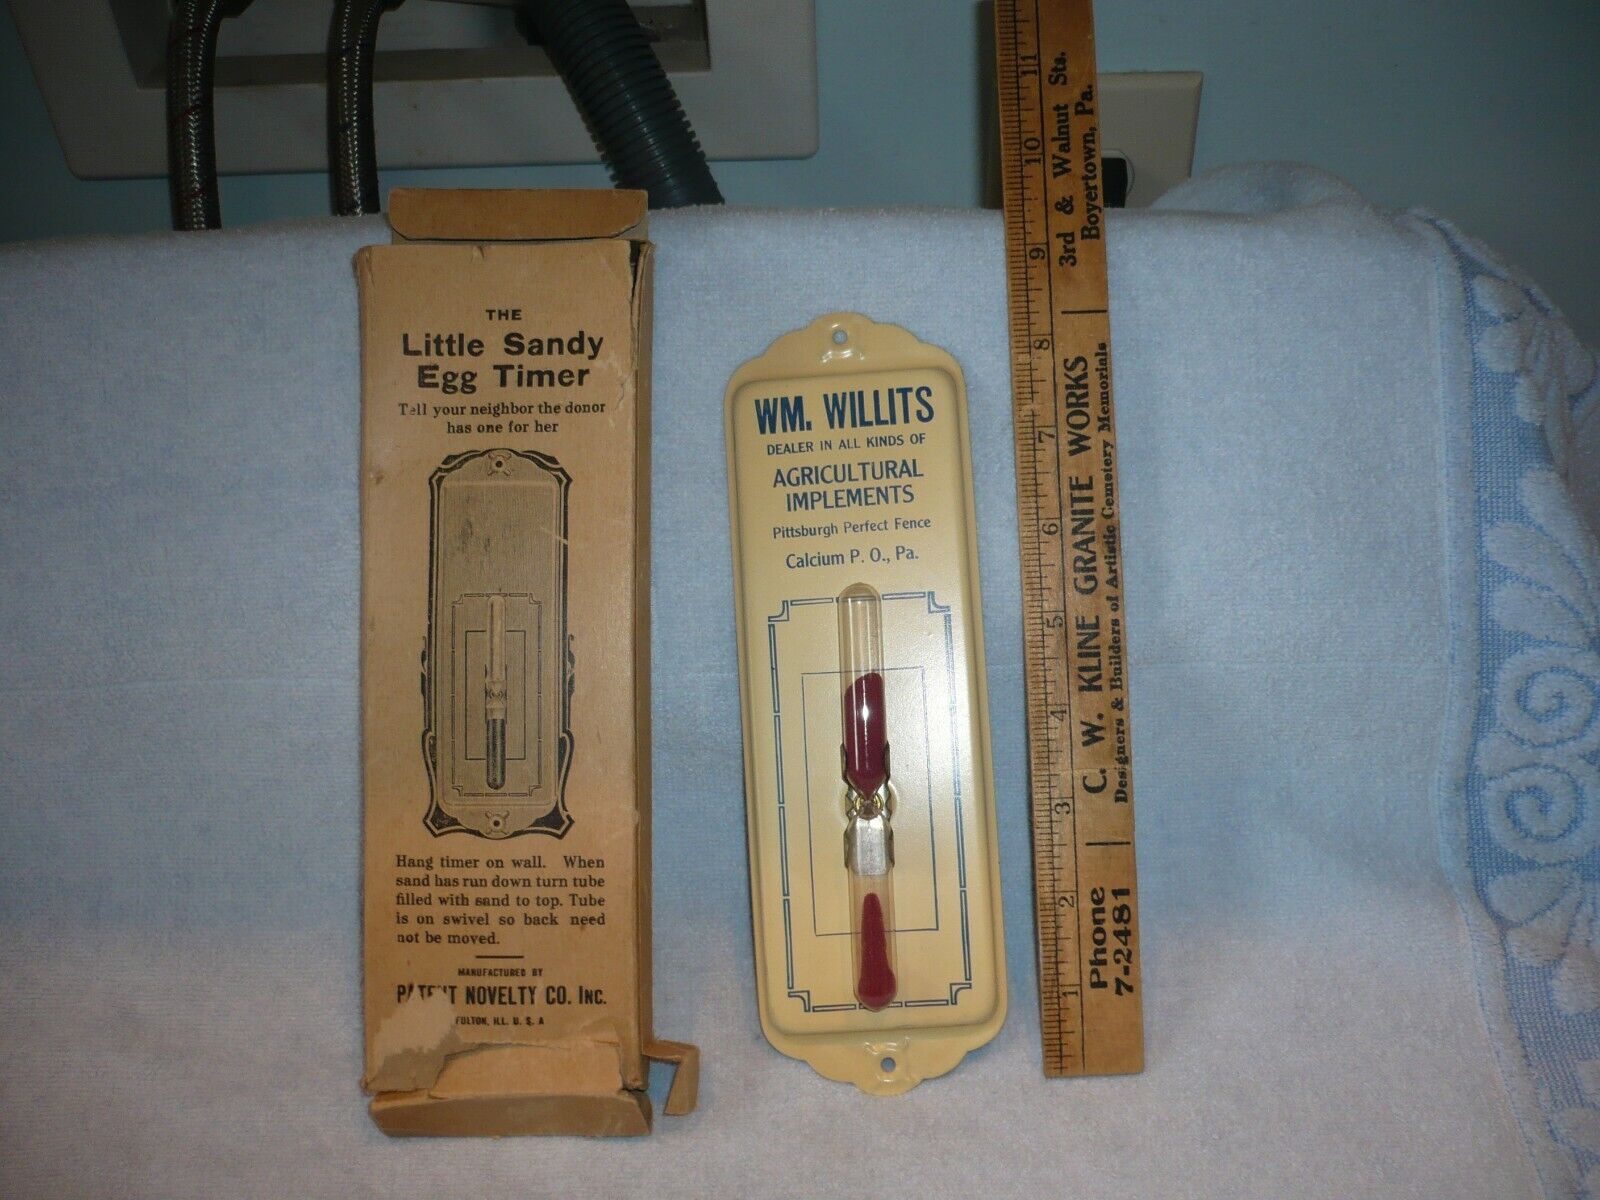   calcium pa berks county wm. willits agricultural implements dealer timer 